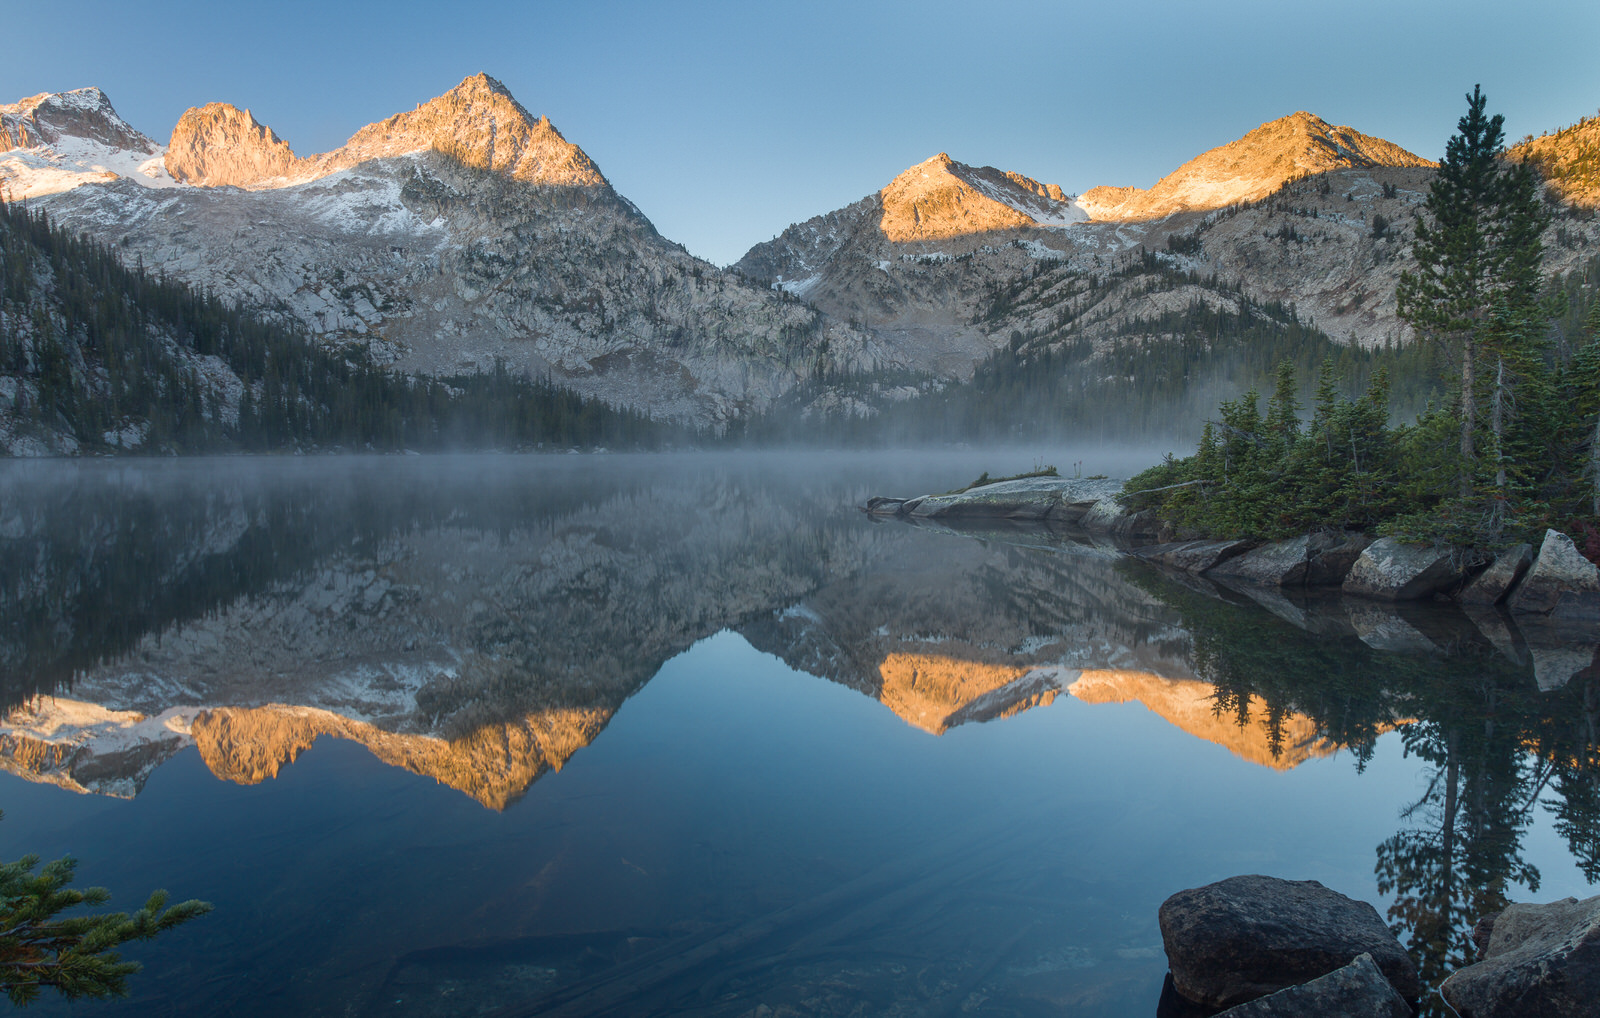  Sunrise at Toxaway Lake in the Sawtooths 